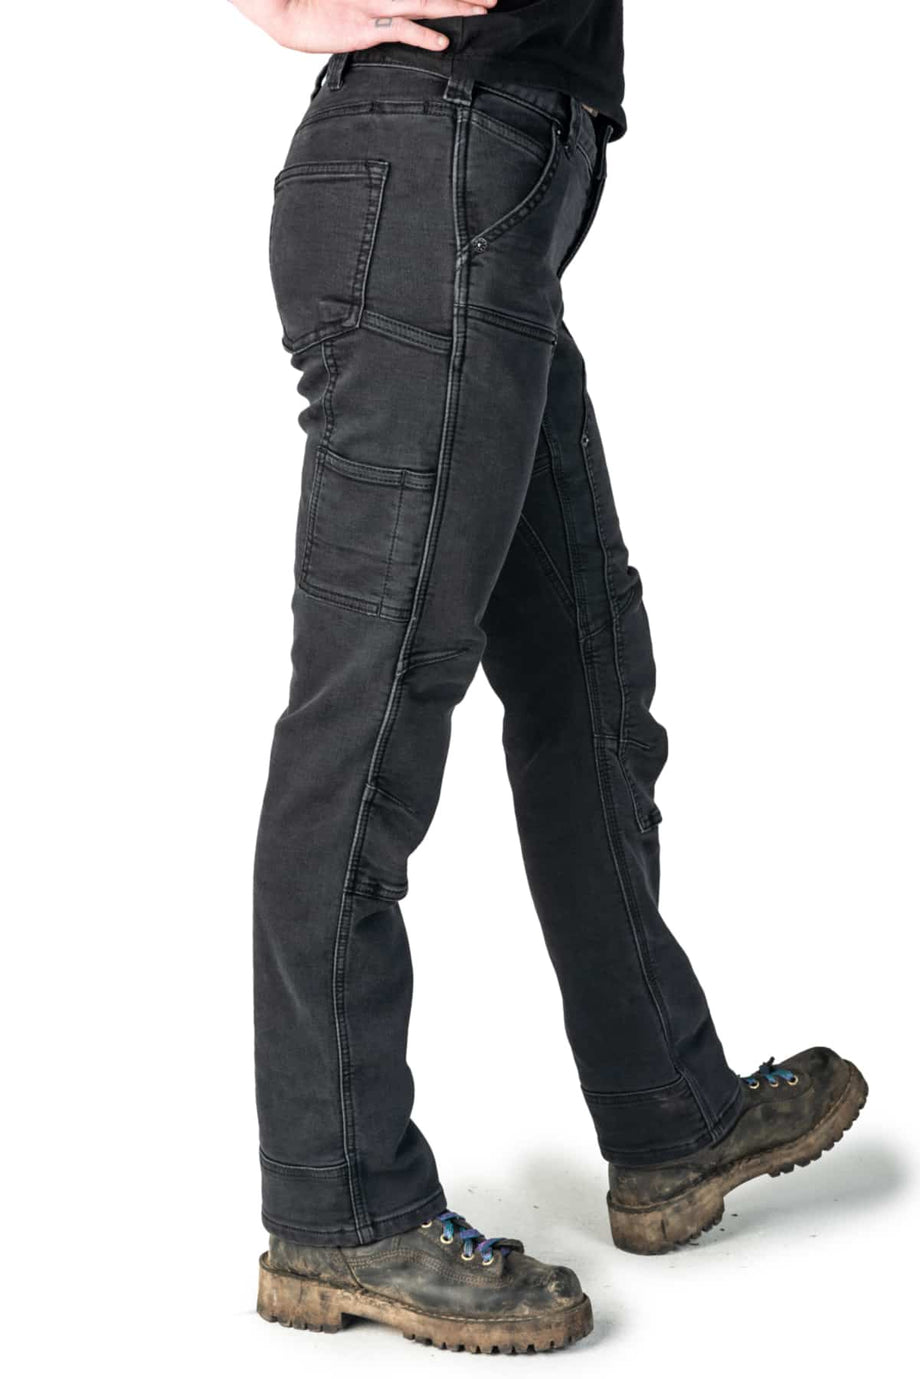 Women's Dovetail Workwear Britt Utility Grey Stretch Canvas Work Pant -  Herbert's Boots and Western Wear